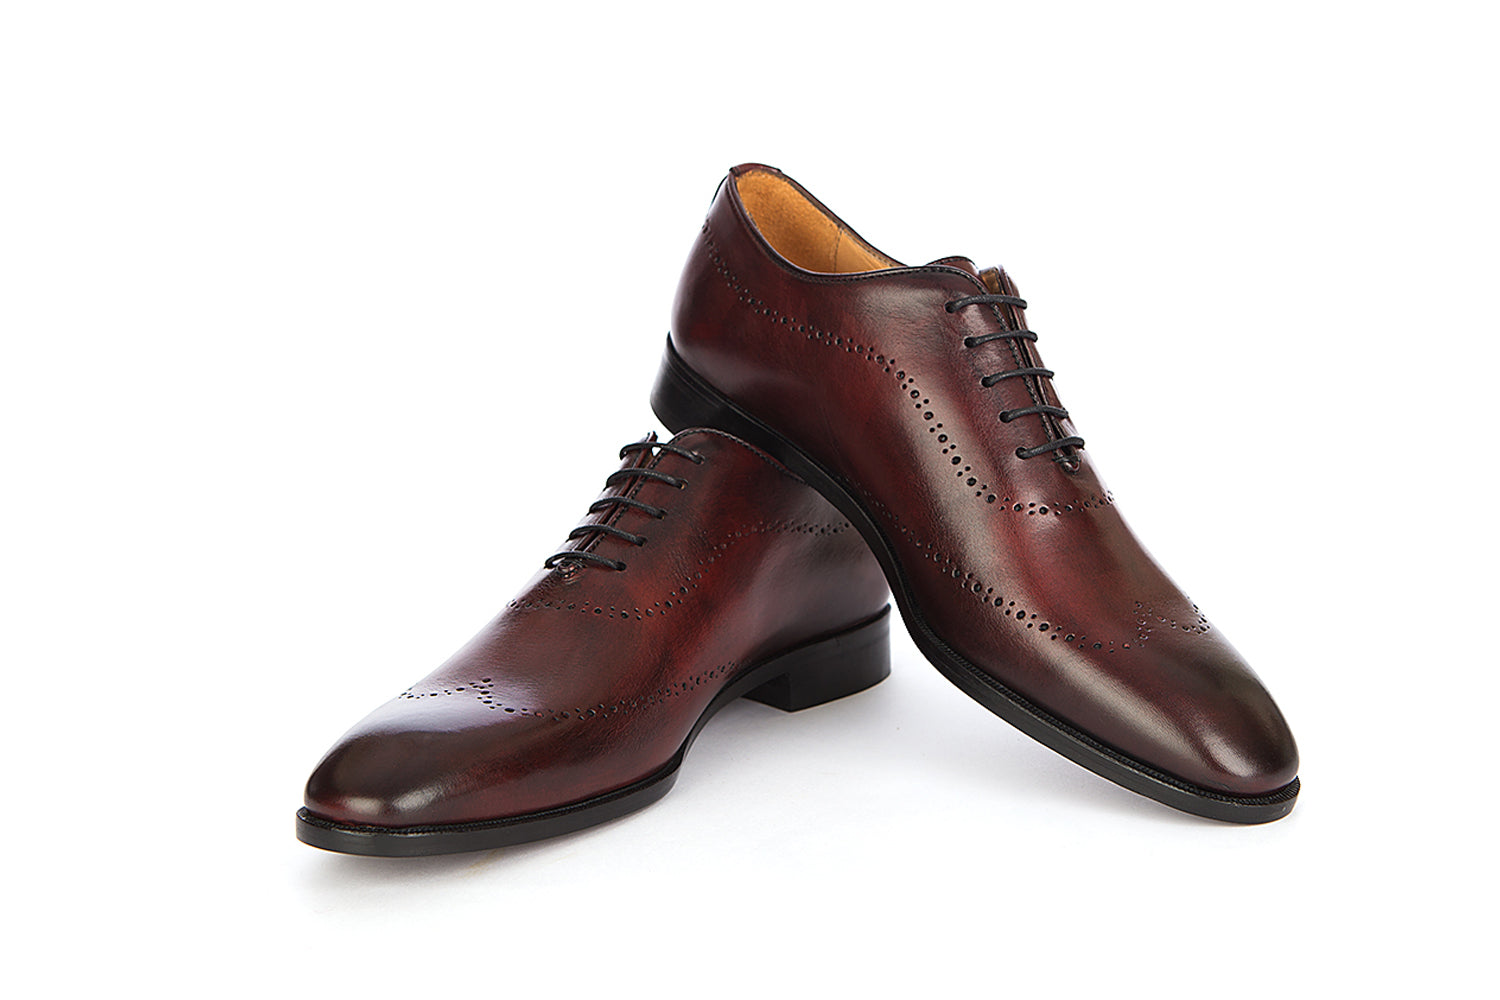 Handmade Leather Shoes Oxford Style